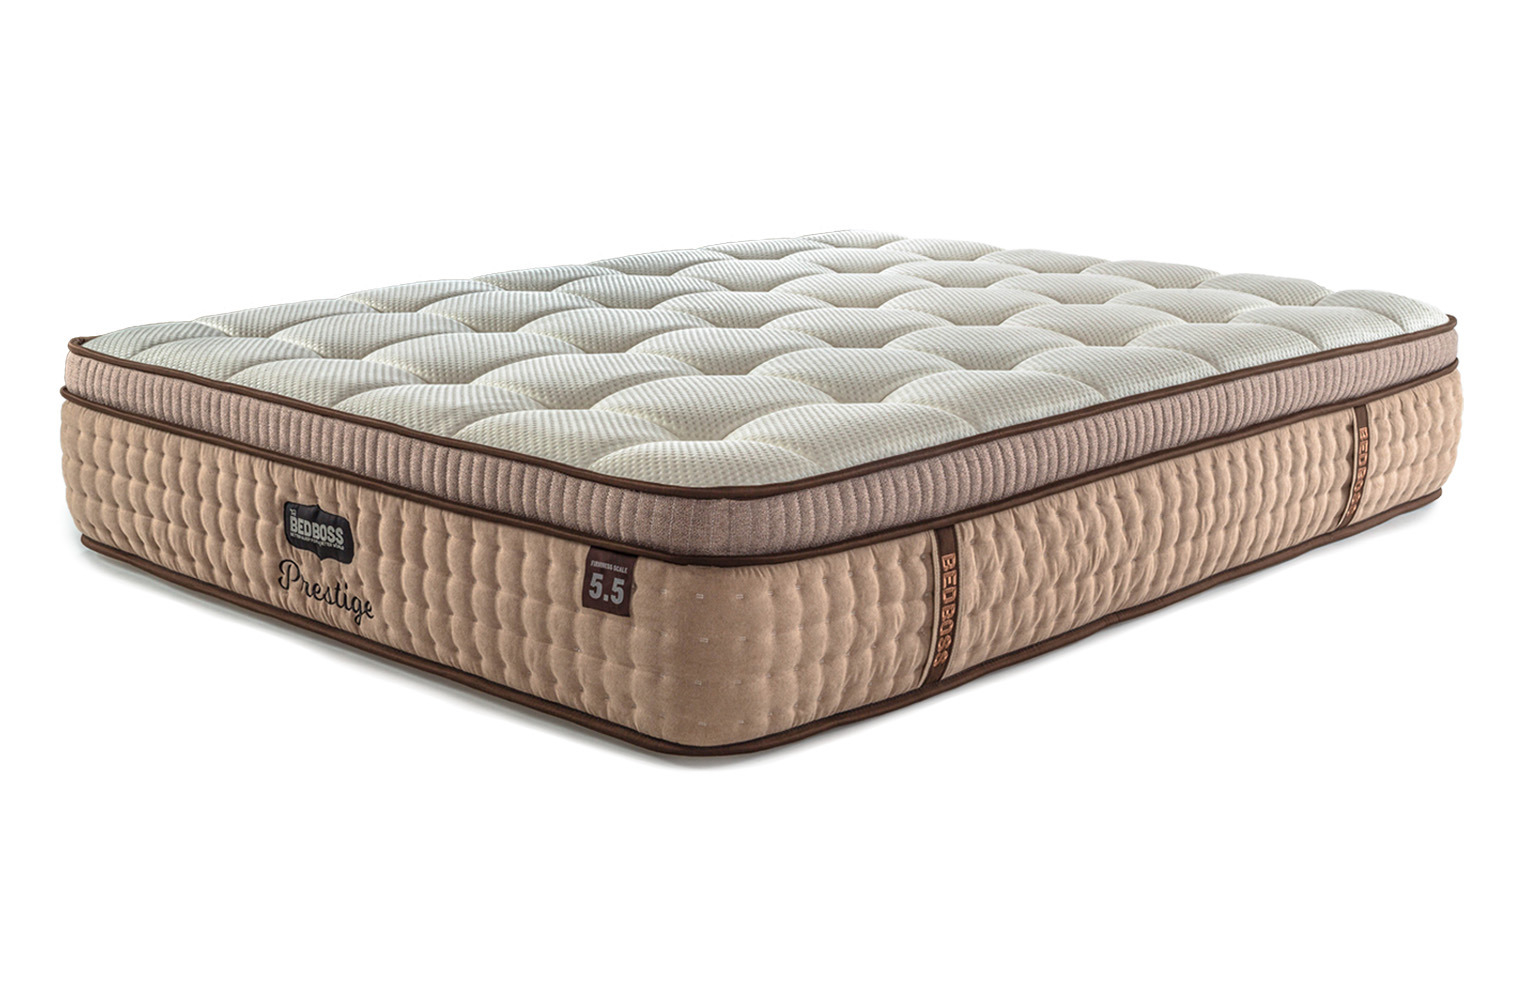 Uncover 64+ Beautiful prestige memory foam mattress Voted By The Construction Association